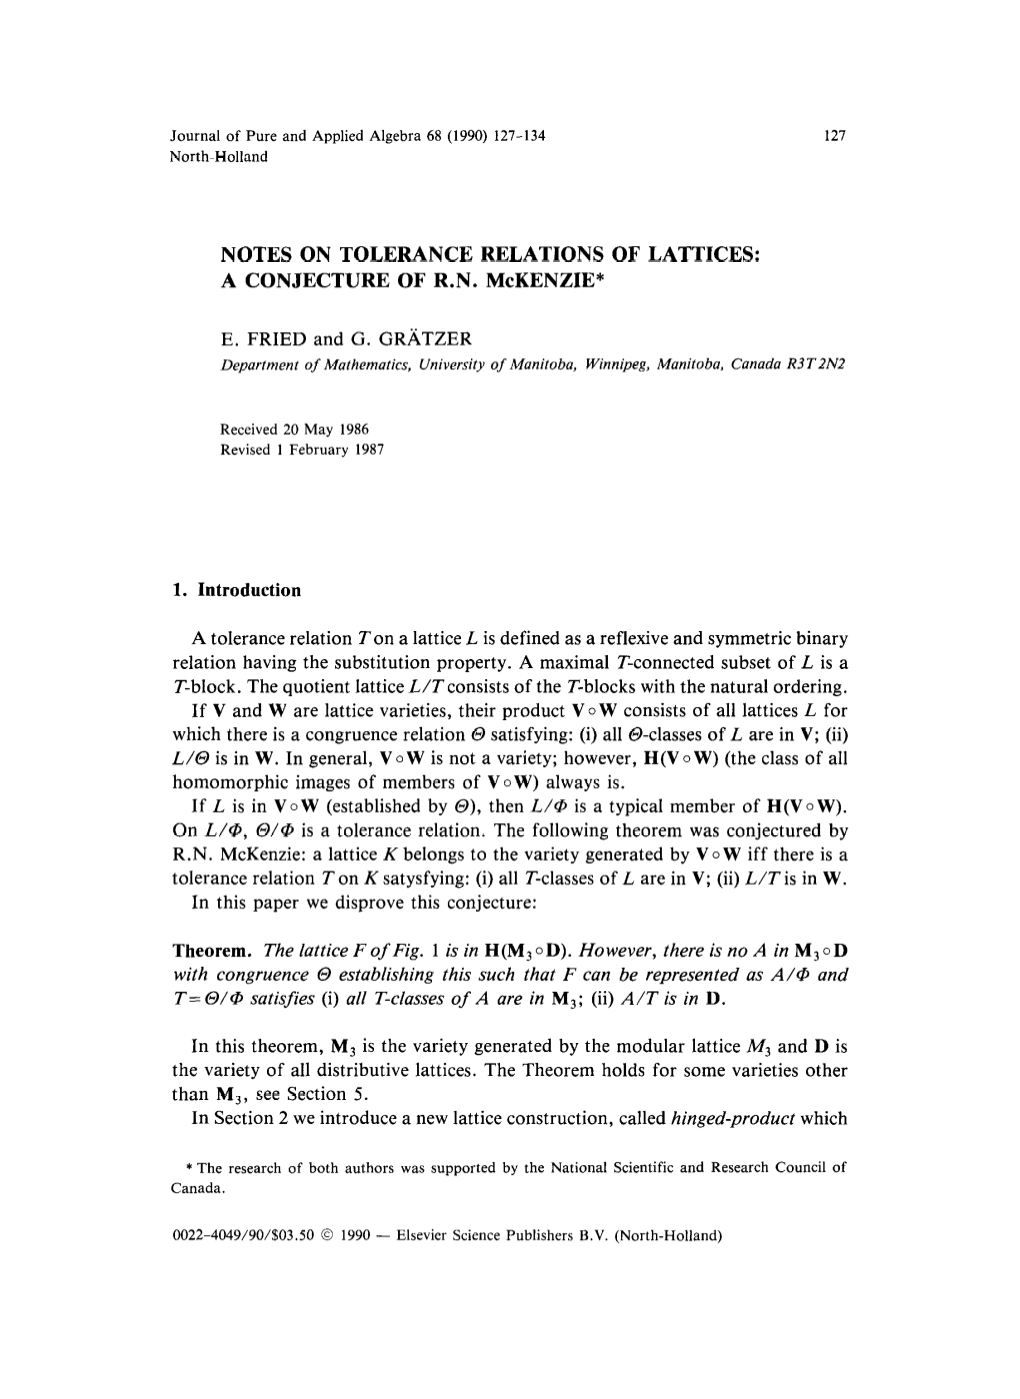 Notes on Tolerance Relations of Lattices: a Conjecture of R.N